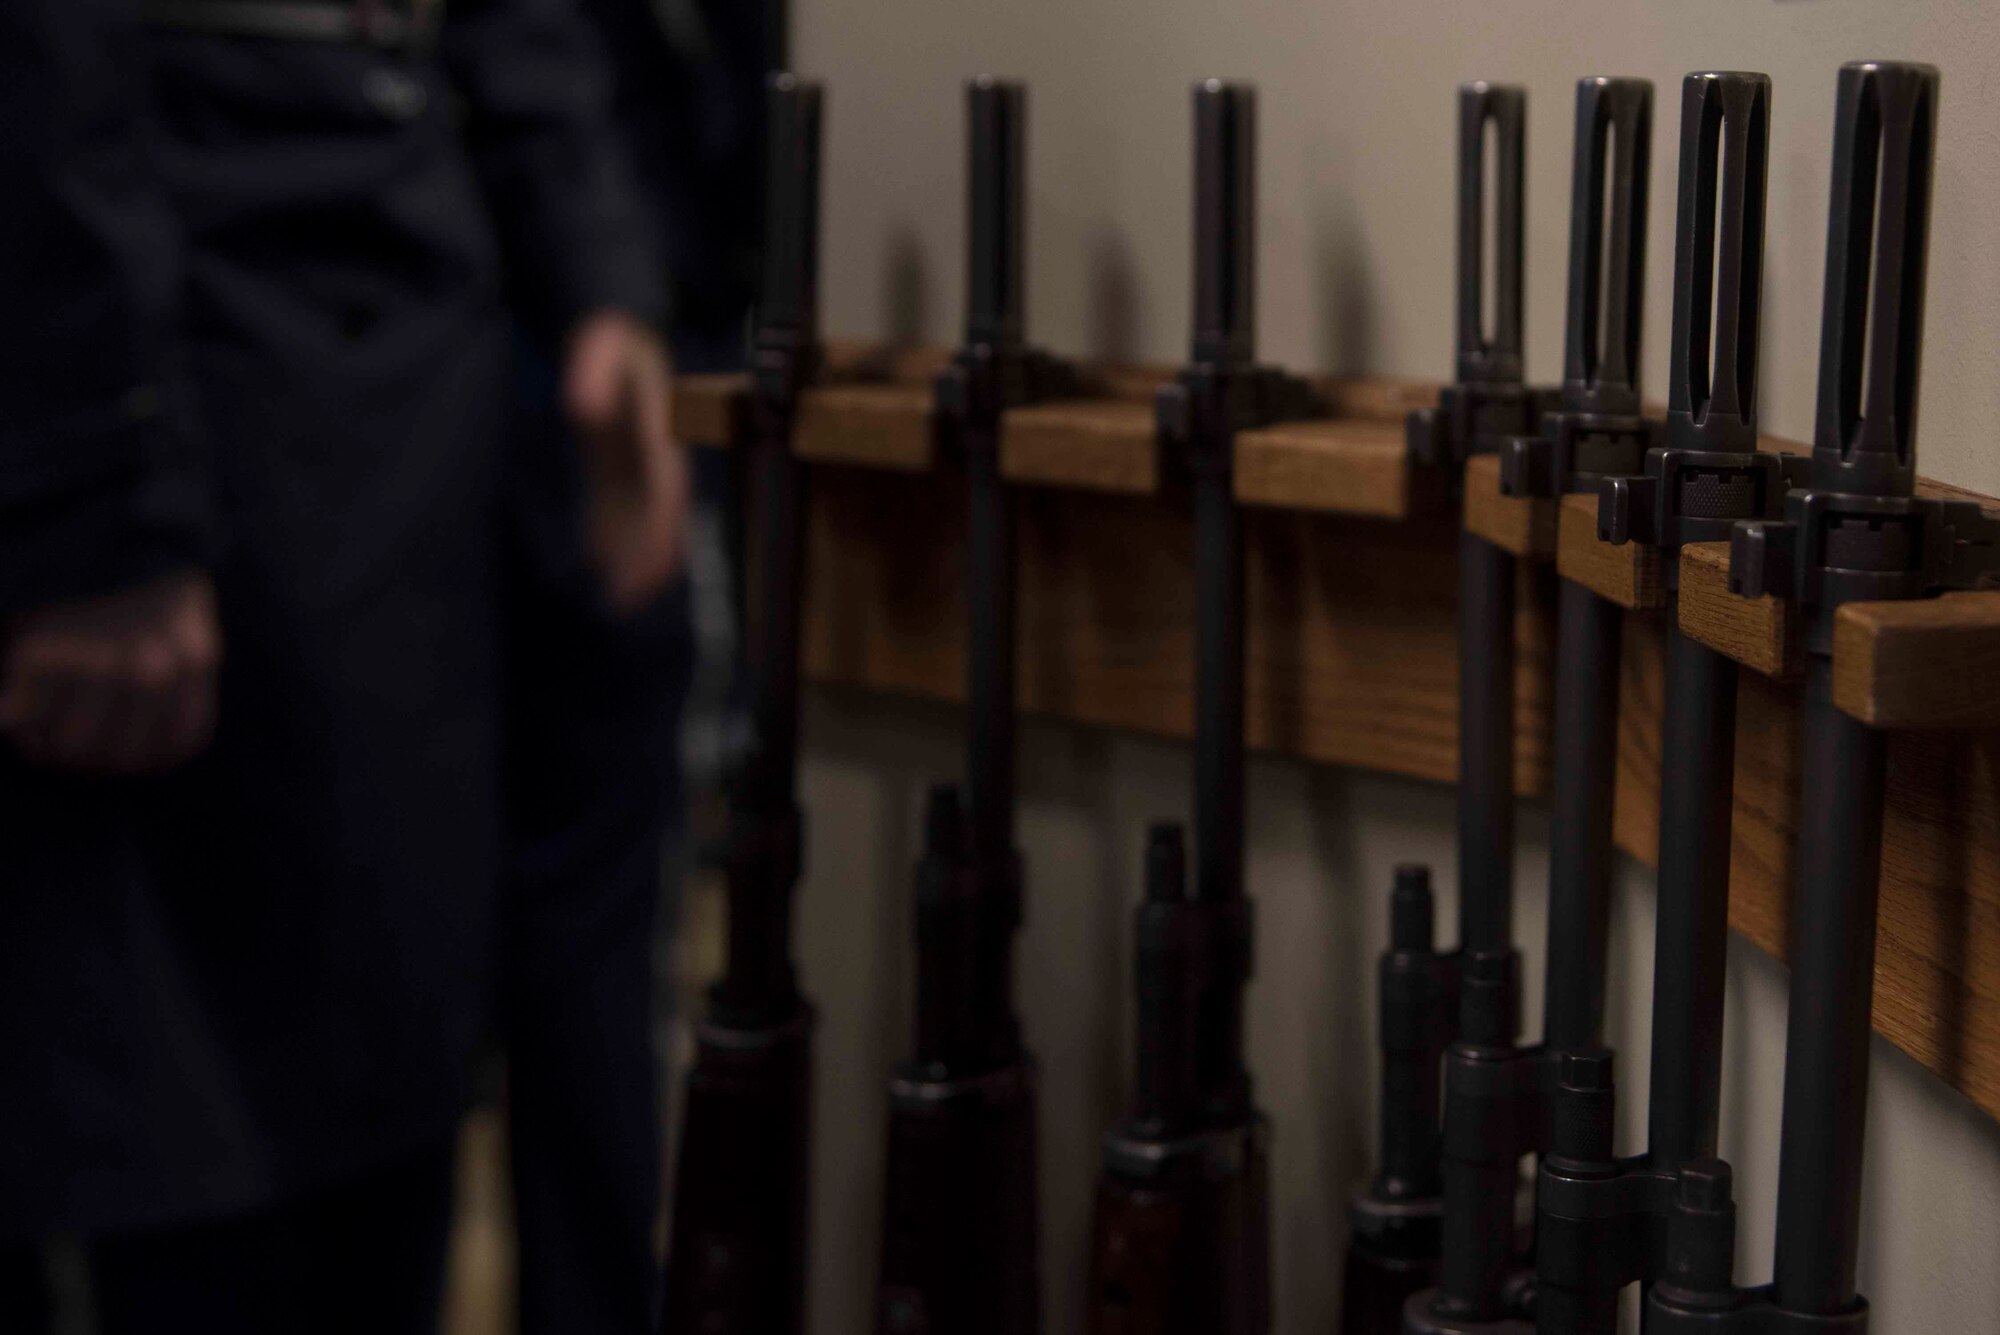 Rifles sit in a weapons rack Dec. 19, 2016, at Fort George Wright Cemetery, Spokane, Washington. A 3-volley rifle salute is often performed by seven members firing three volleys, and is usually seen at a traditional military funeral. (U.S. Air Force photo/Senior Airman Nick J. Daniello)